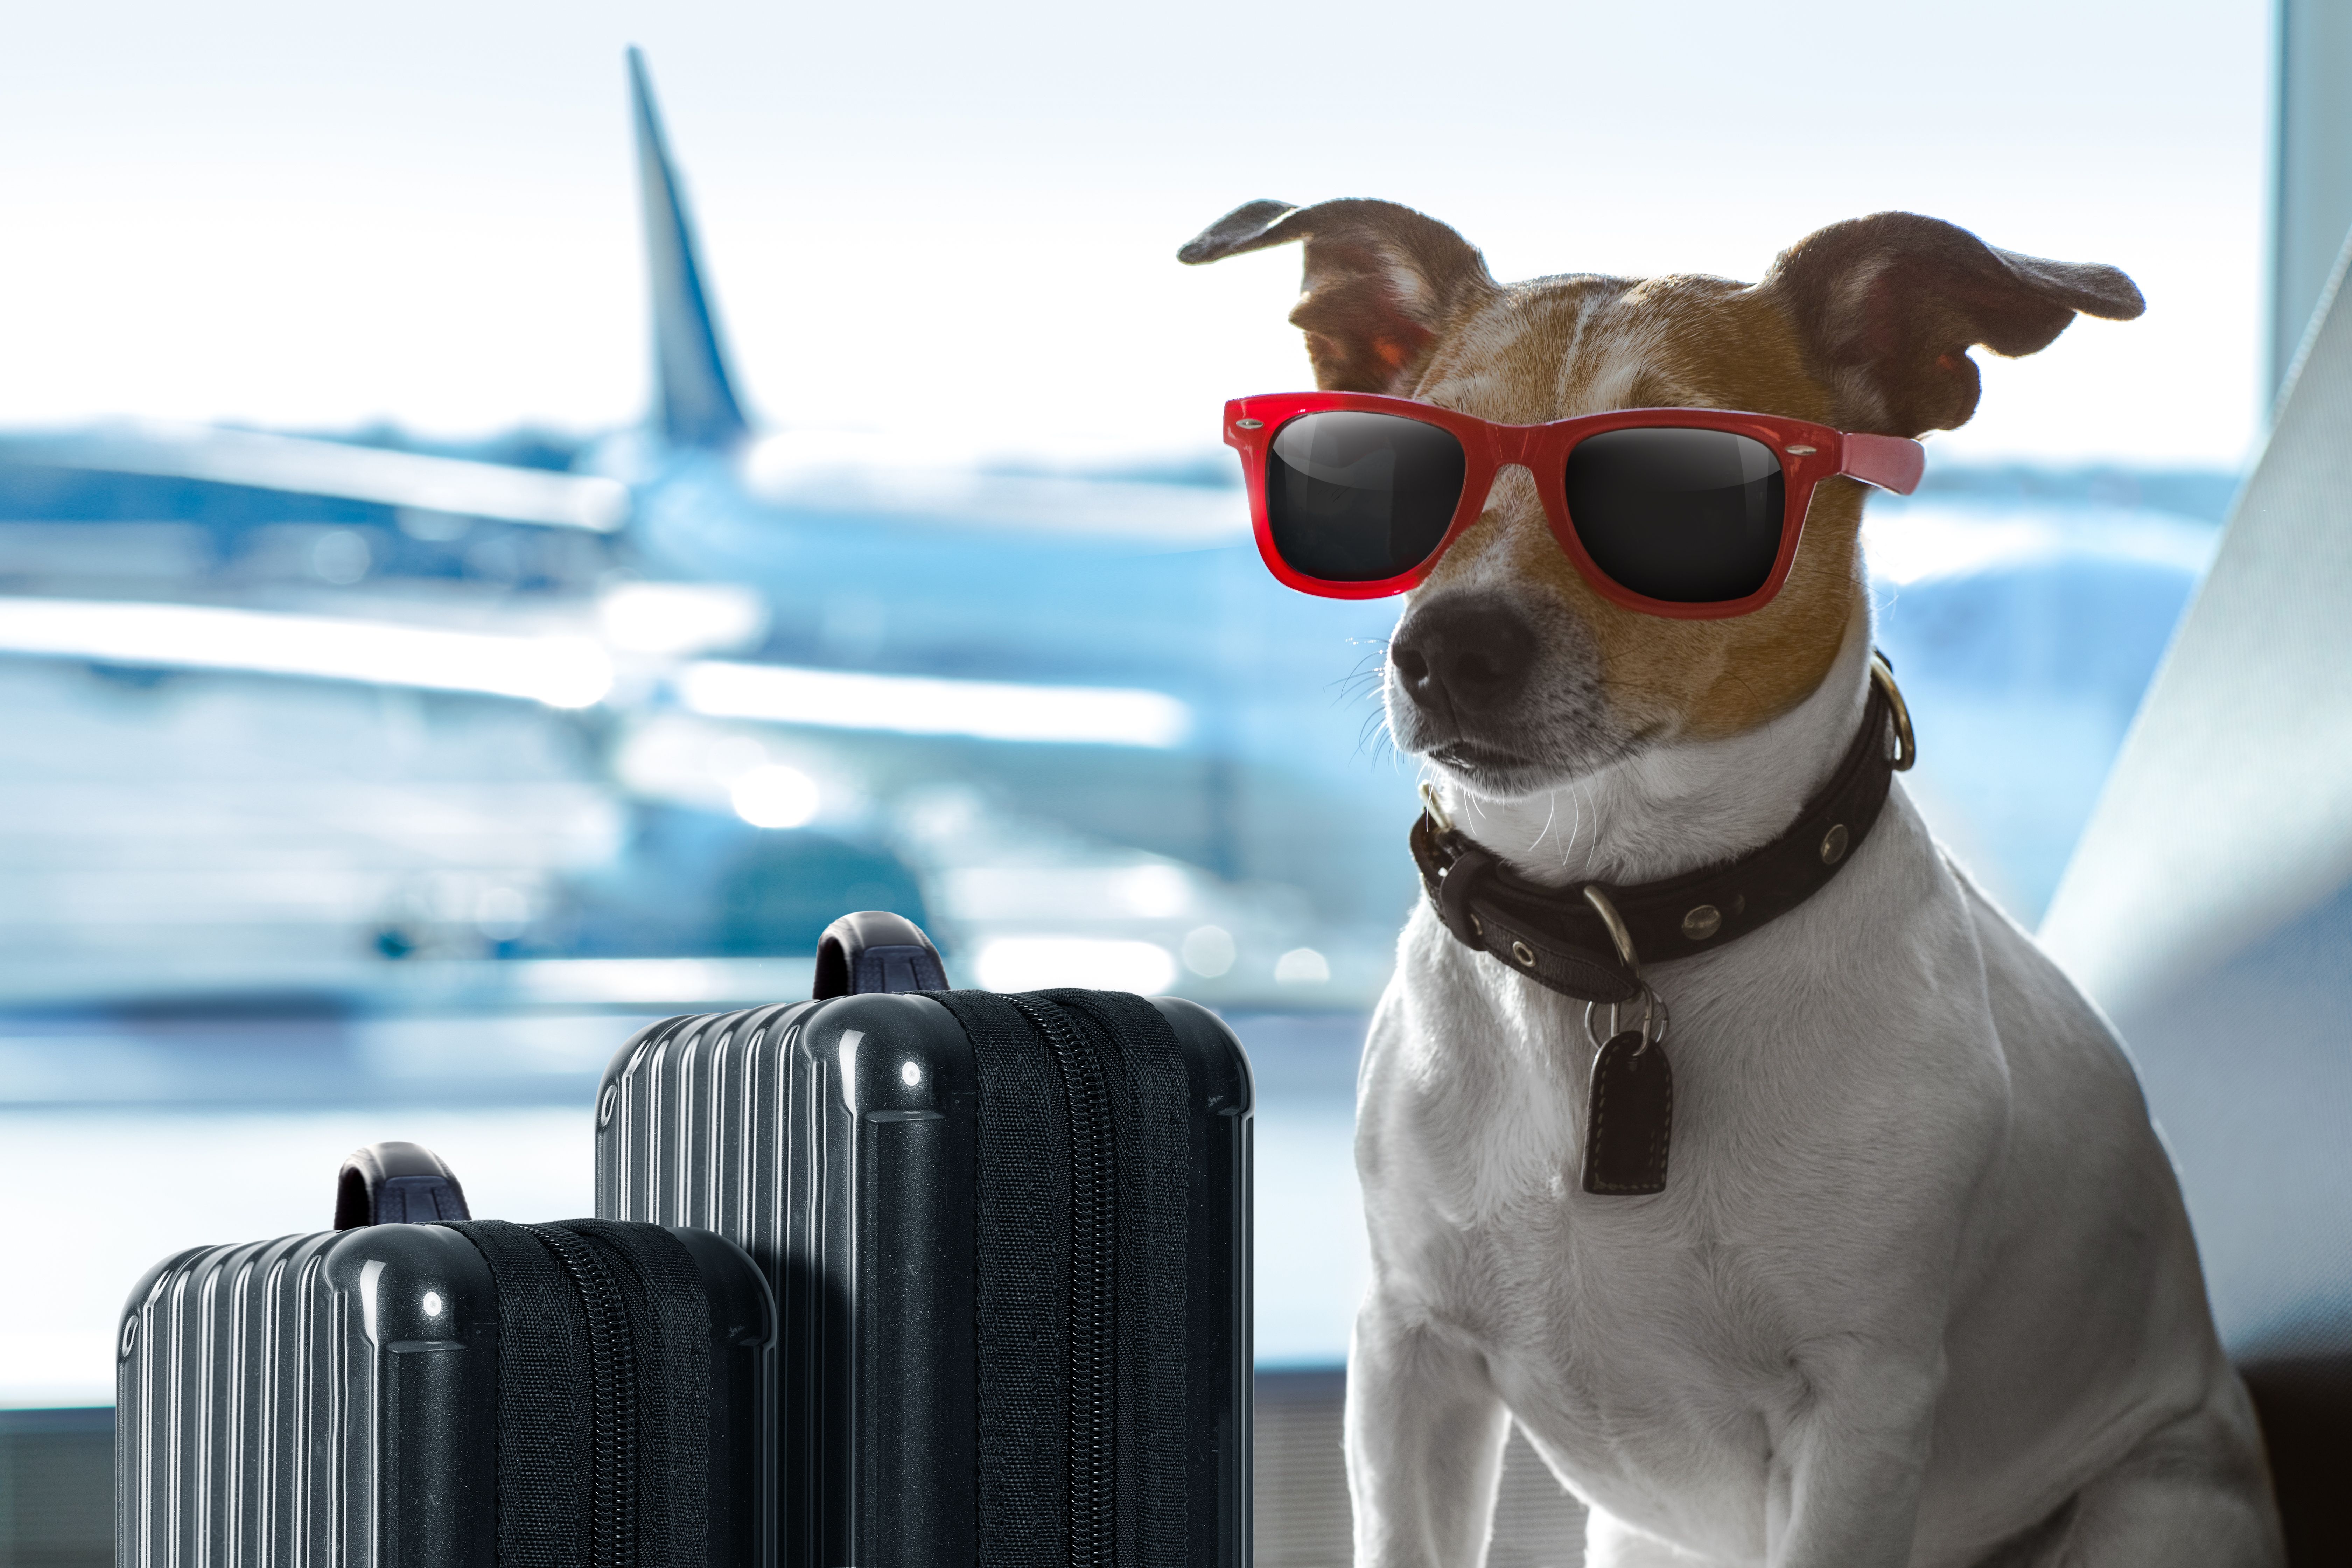 Dog with sunglasses at an airport.